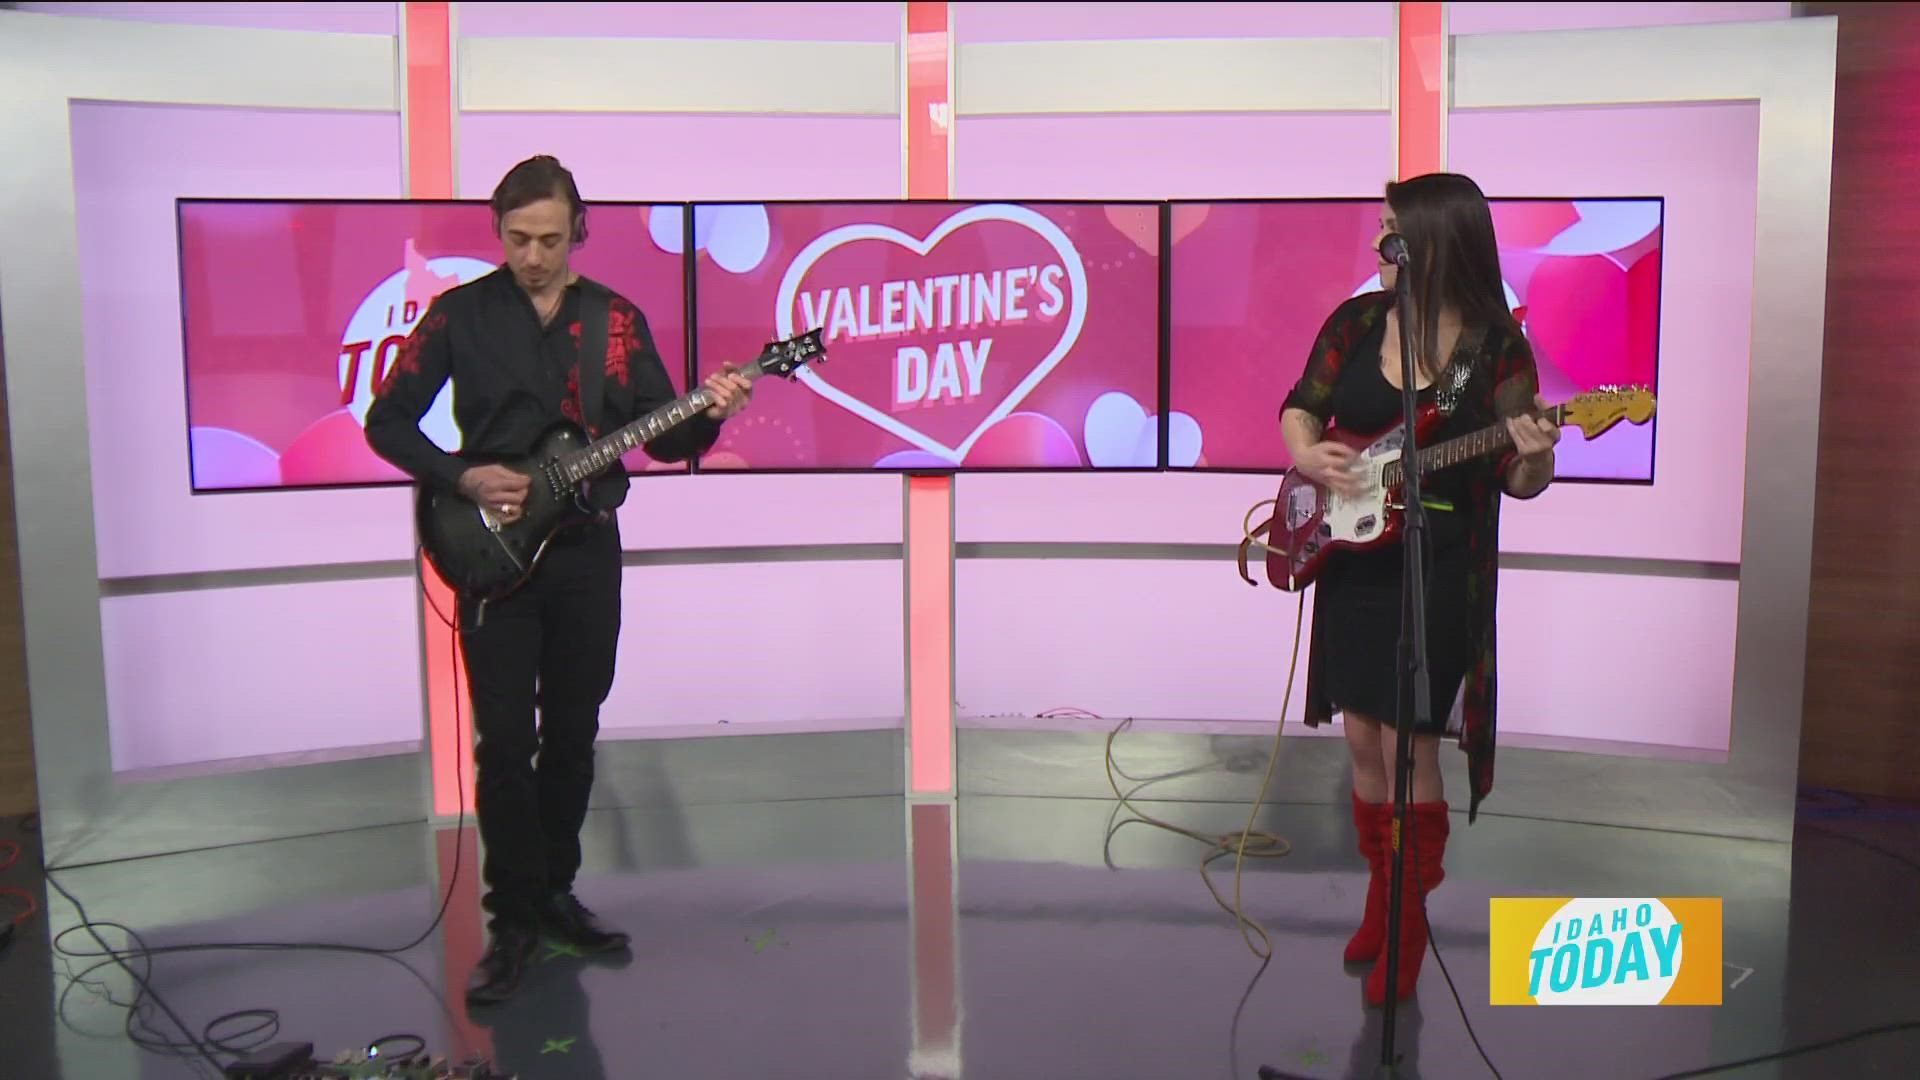 Highway45 gives a special Valentine's Day performance in the Idaho Today studio.